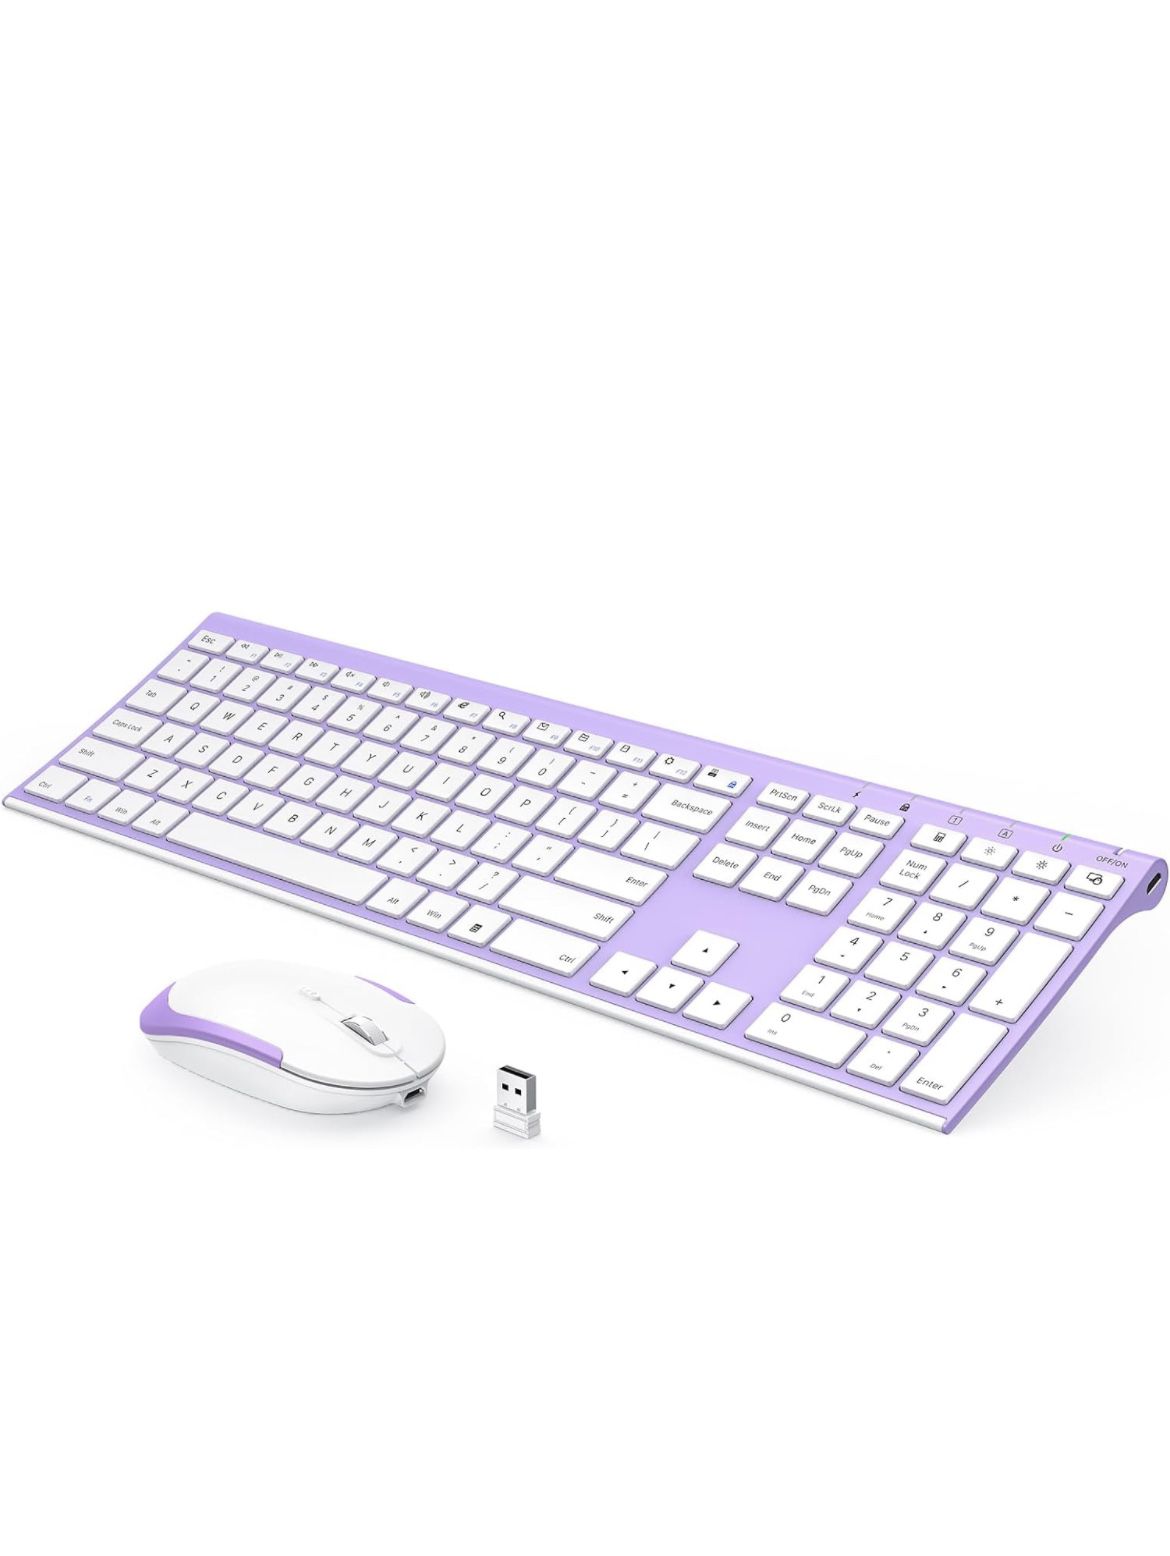 Wireless Keyboard and Mouse, Vssoplor 2.4GHz Rechargeable Compact Quiet Full-Size Keyboard and Mouse Combo with Nano USB Receiver for Windows, Laptop,